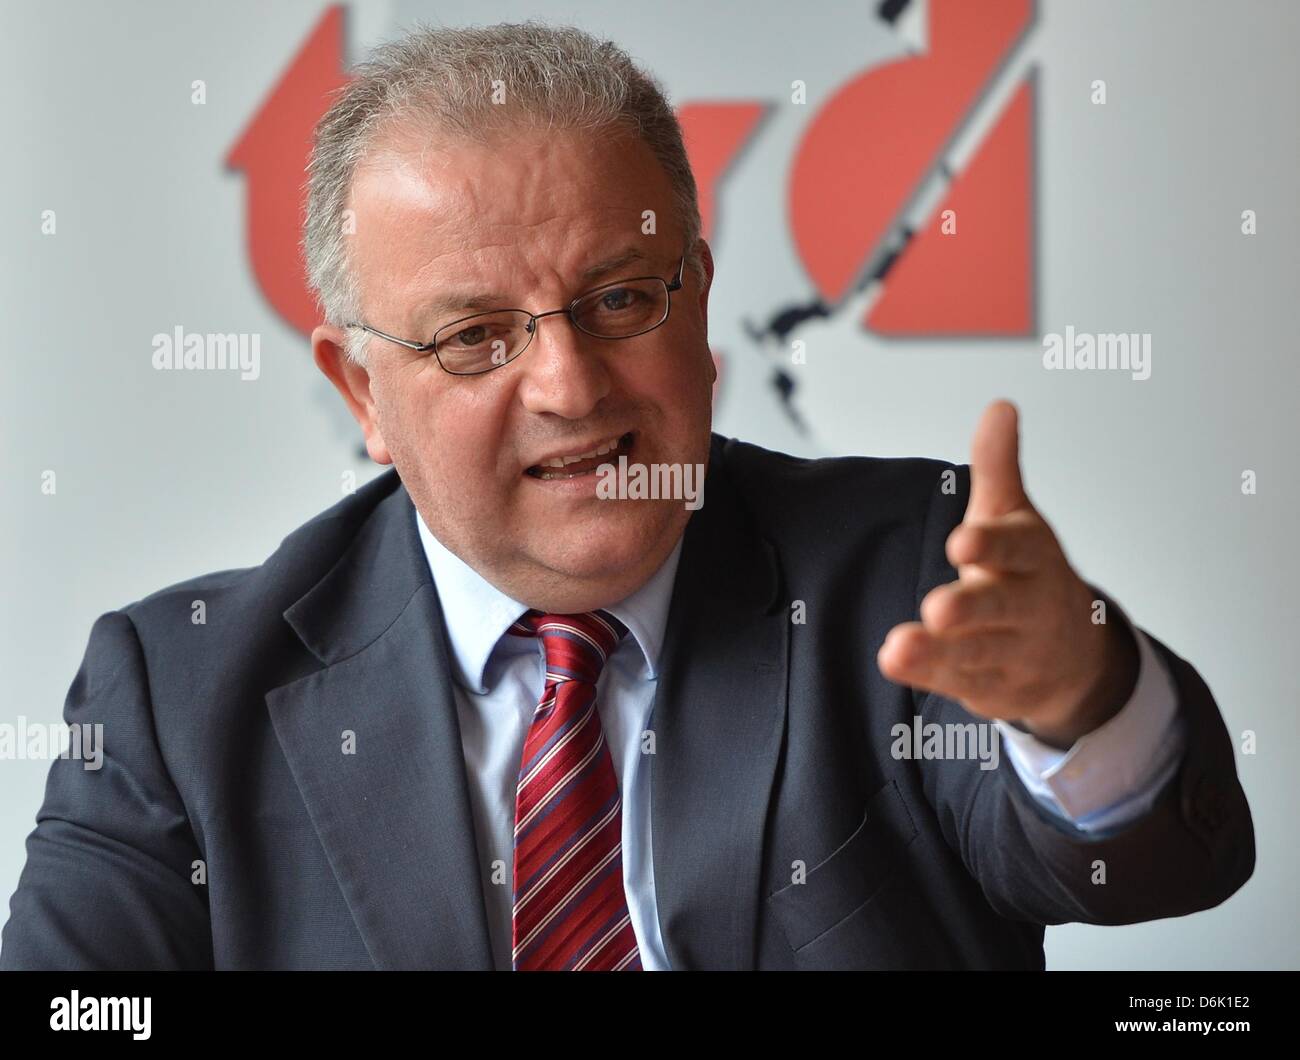 Federal chairman of the Turkish Community Germany (TGD), Kenan Kolat, speaks at a press conference in Berlin, Germany, 19 April 2013. The TGD intends to initiate a Science Award: awards in the categories Human-, Social-, Natural- and Technology Sciences and with a prize money of 5.000 euros each shall be introduced. Photo: BRITTA PEDERSEN Stock Photo